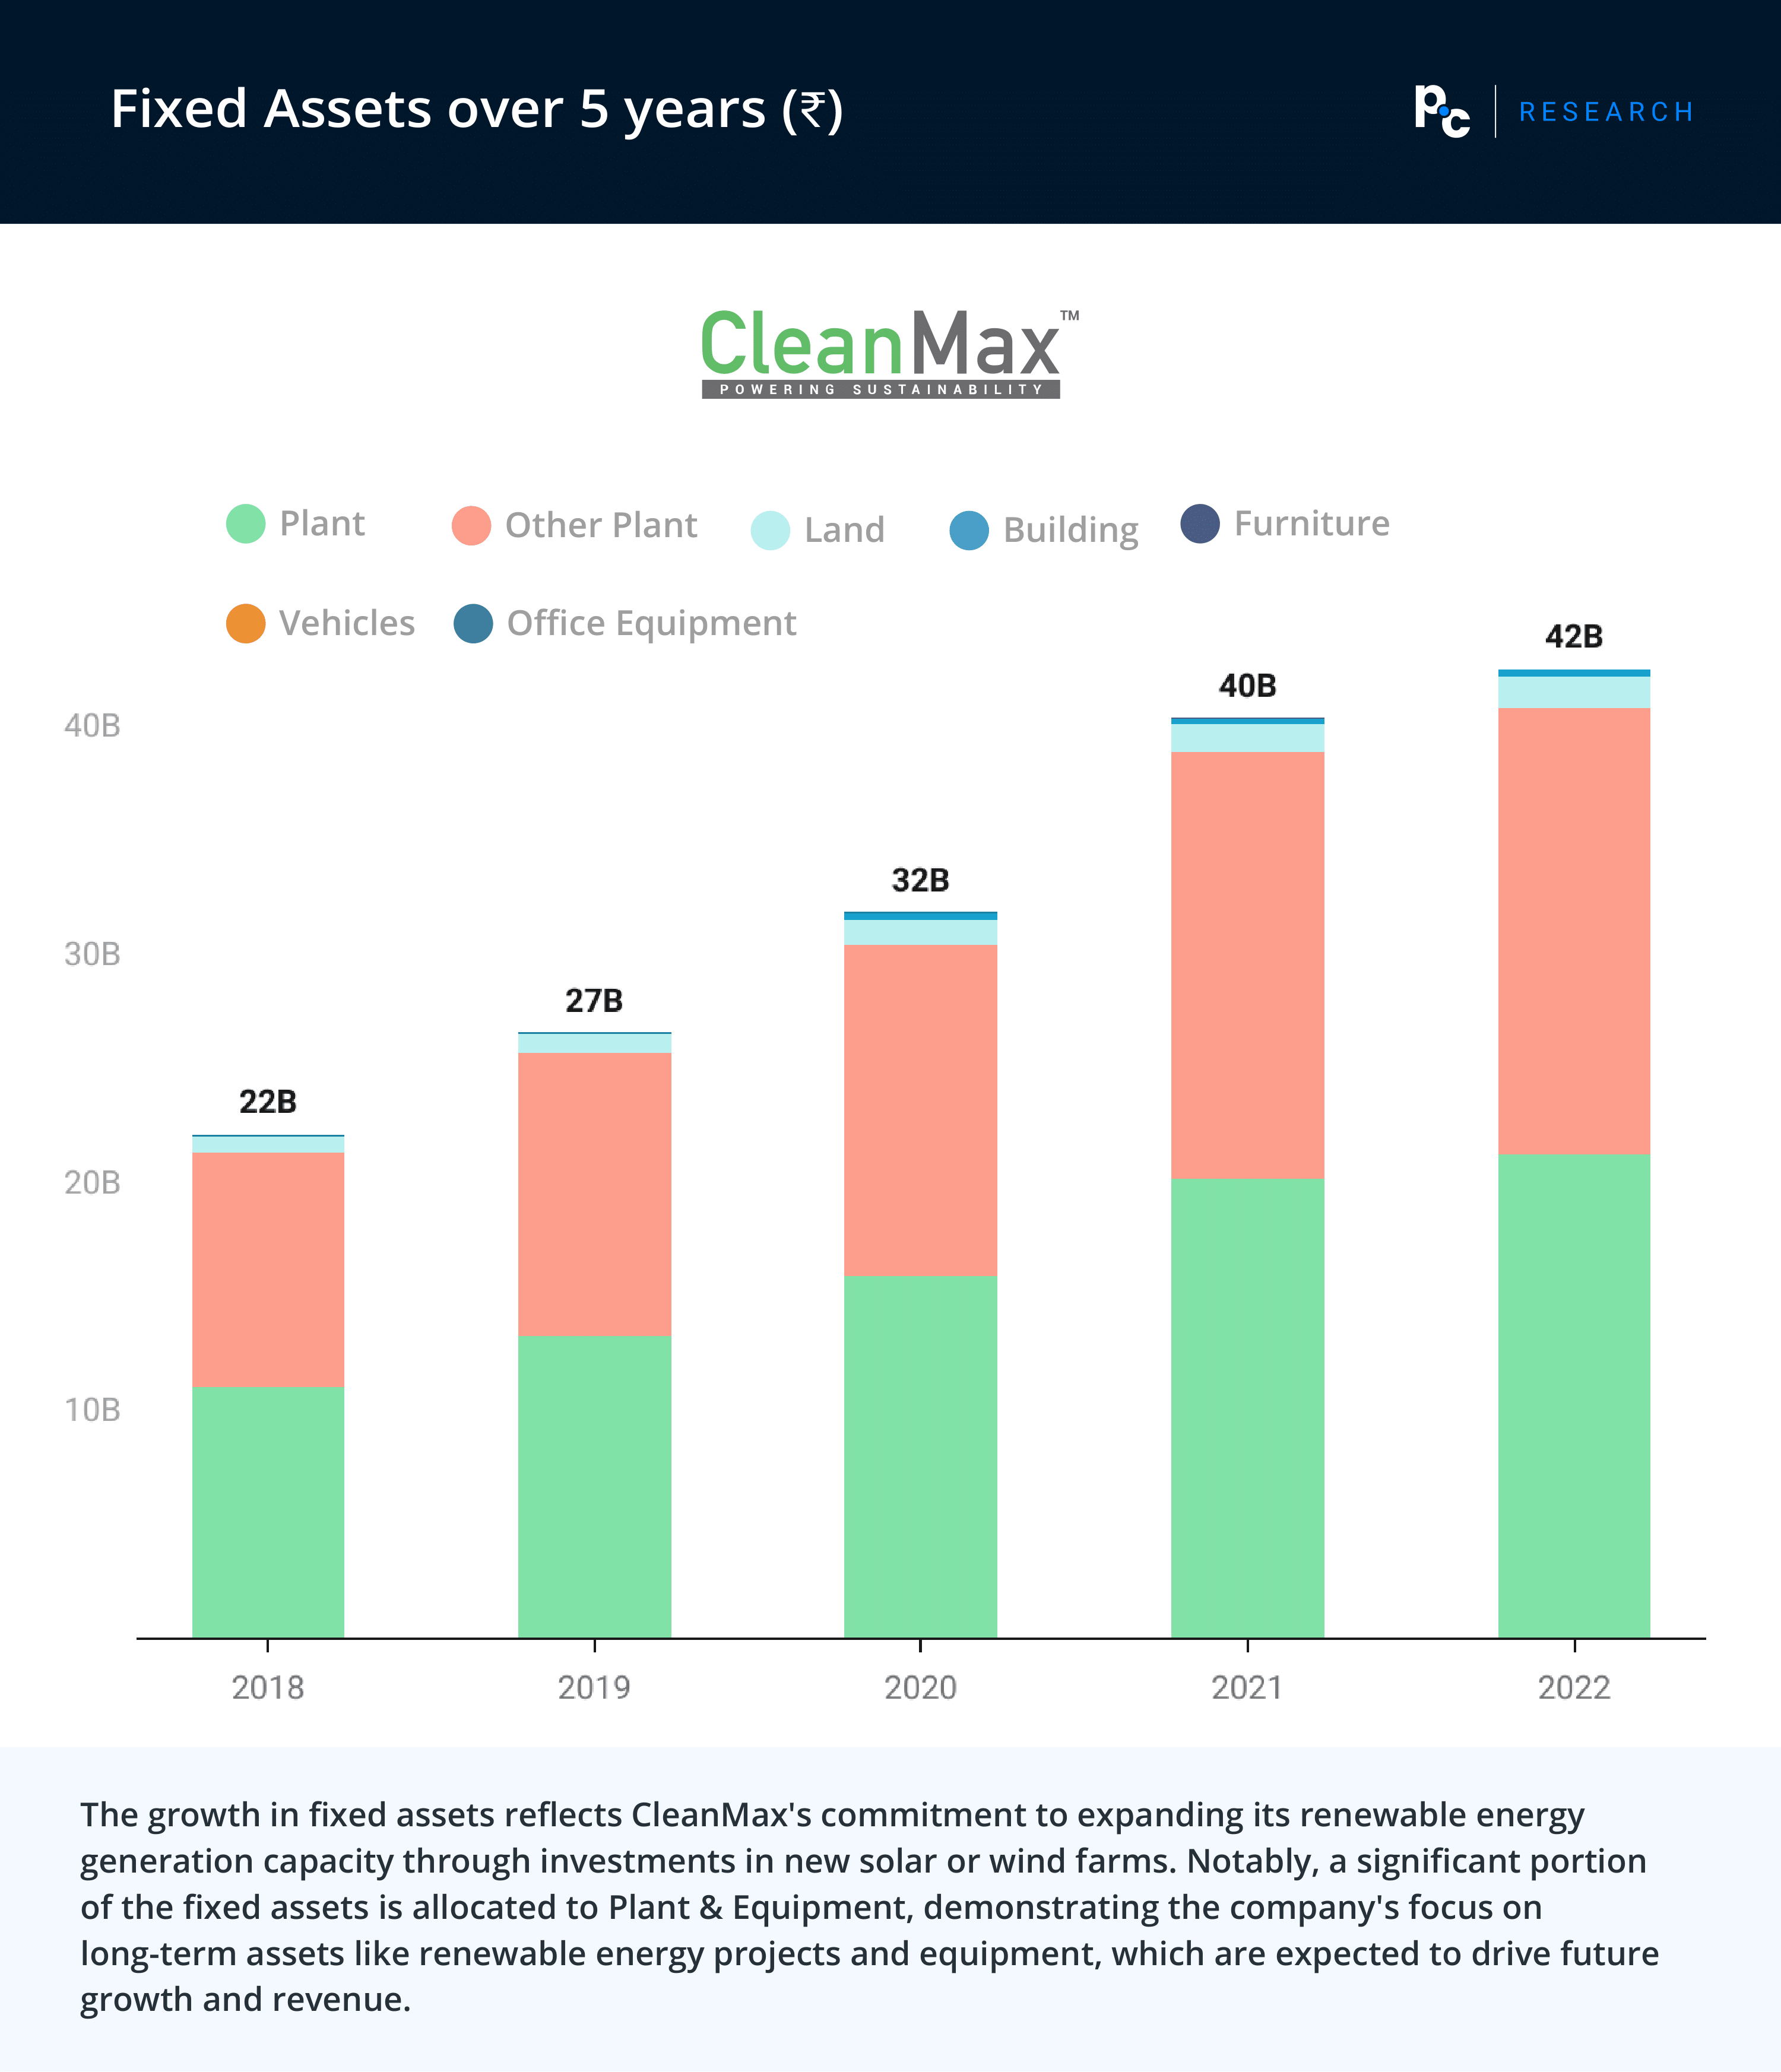 CleanMax: Fixed Assets over 5 years (₹).

The growth in fixed assets reflects CleanMax's commitment to expanding its renewable energy generation capacity through investments in new solar or wind farms. Notably, a significant portion of the fixed assets is allocated to Plant & Equipment, demonstrating the company's focus on long-term assets like renewable energy projects and equipment, which are expected to drive future growth and revenue.